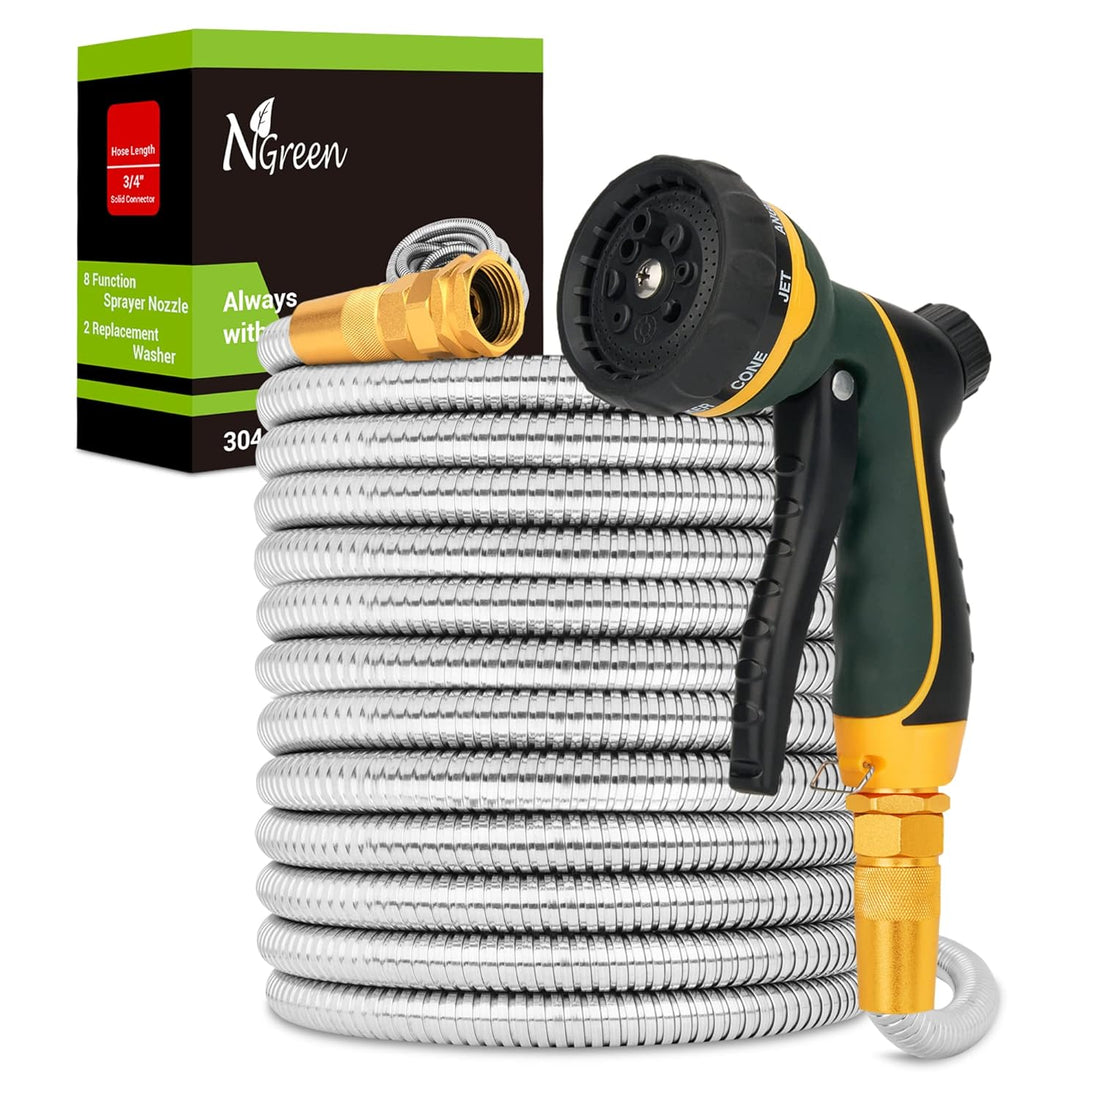 NGreen Stainless Steel Garden Hose - 304 Metal Water Hose, High Pressure, Puncture and Corrosion Resistant, Flexible and Never Kink, Solid Metal Fittings, Rust Proof, Durable and Easy to Store